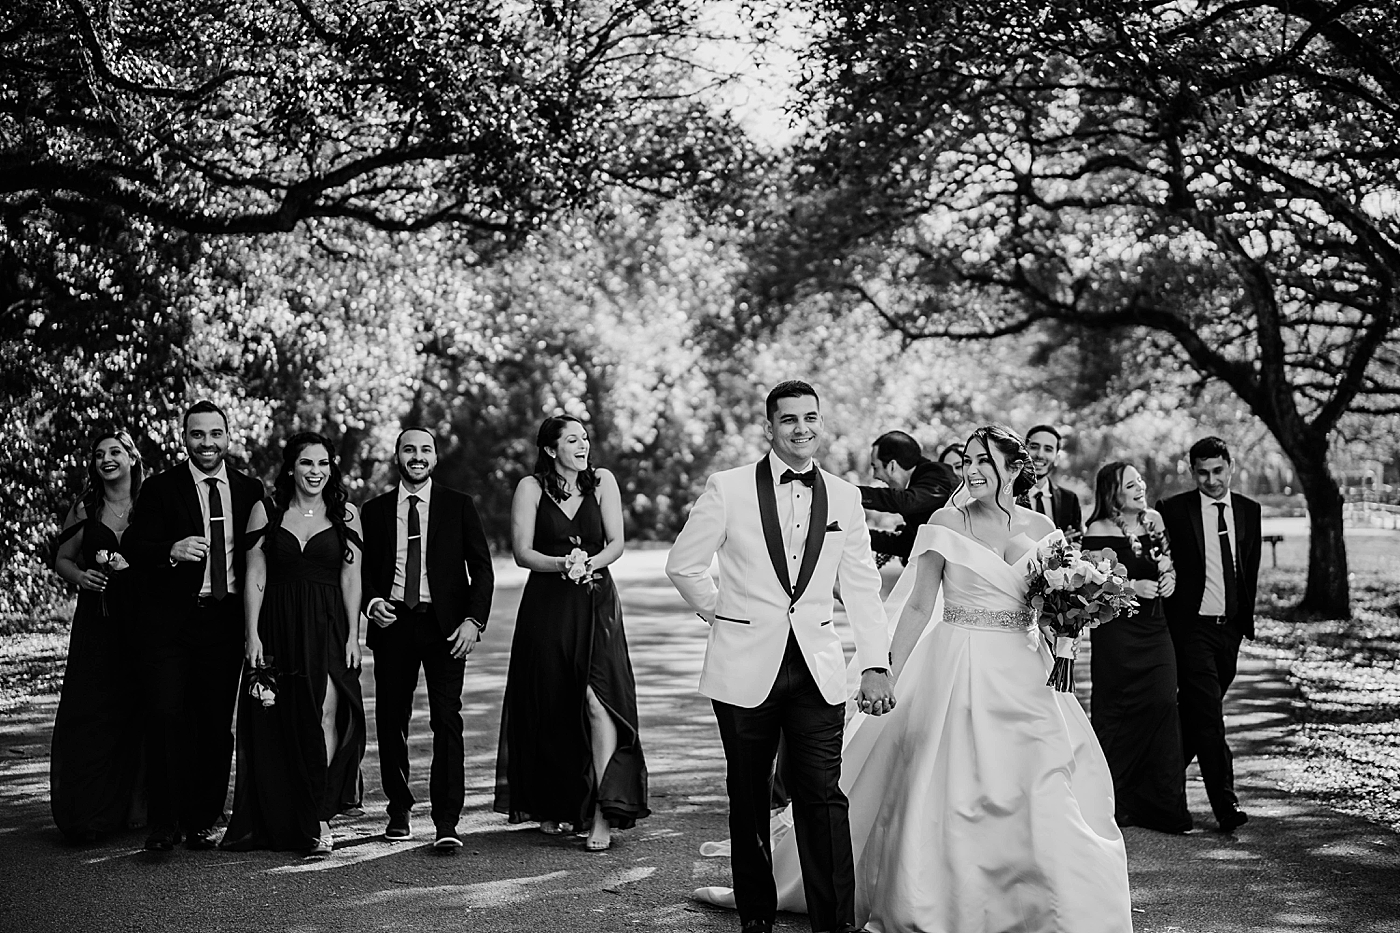 B&W Bride and Groom walking together with Wedding party following behind Lavan Venue Wedding Photography captured by South Florida Wedding Photographer Krystal Capone Photography